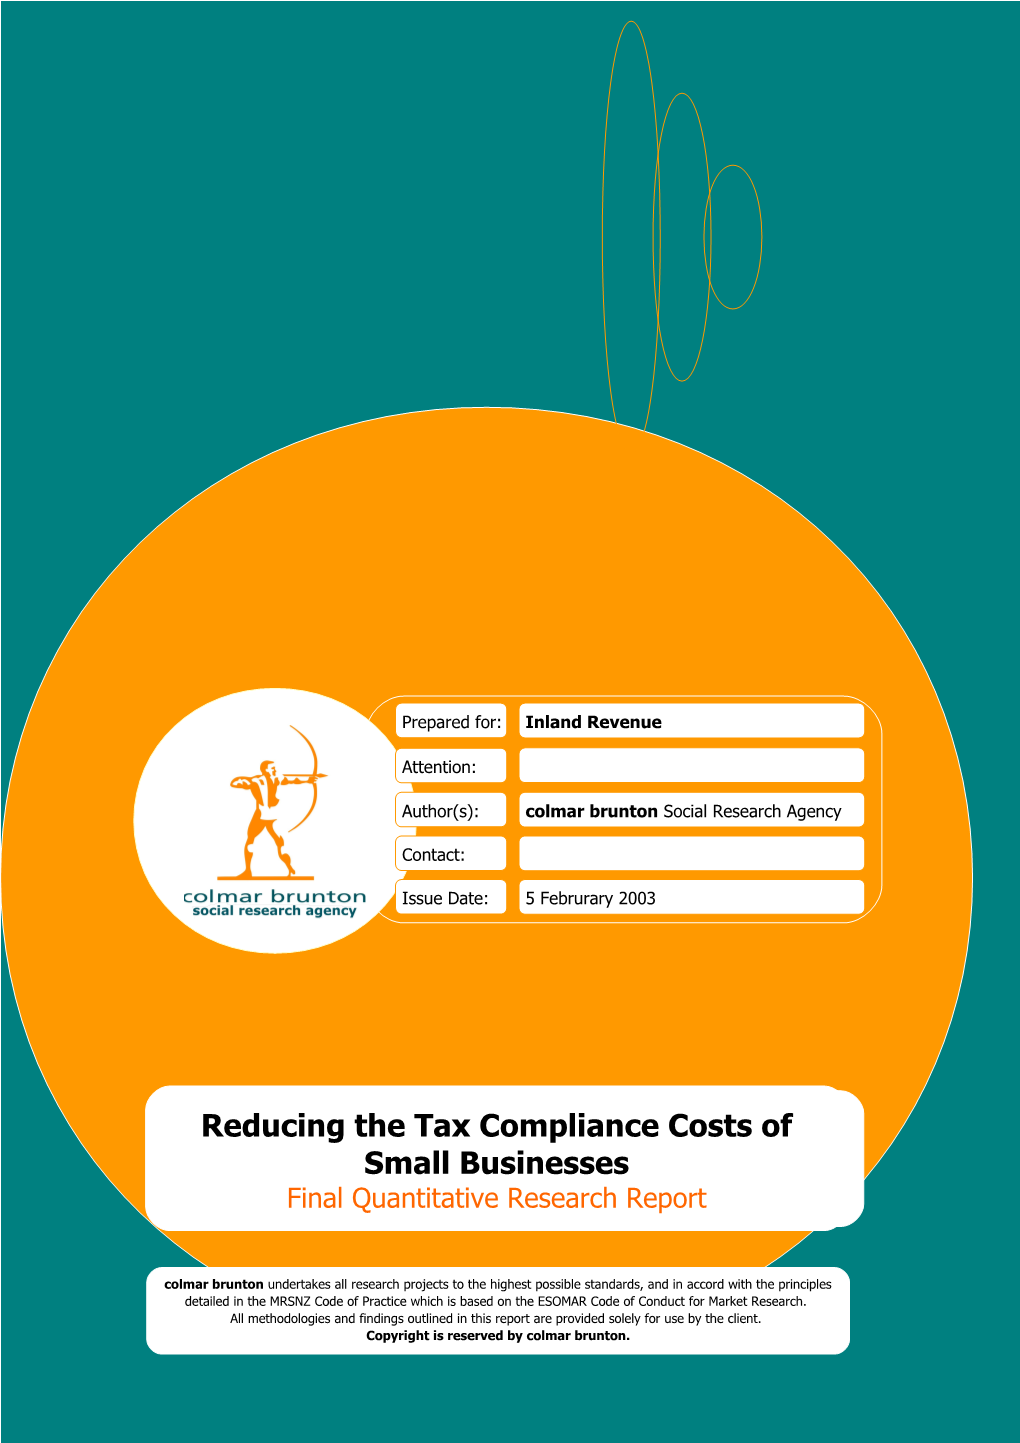 Final Quantitative Research Report: Reducing The Tax Compliance Costs Of Small Businesses